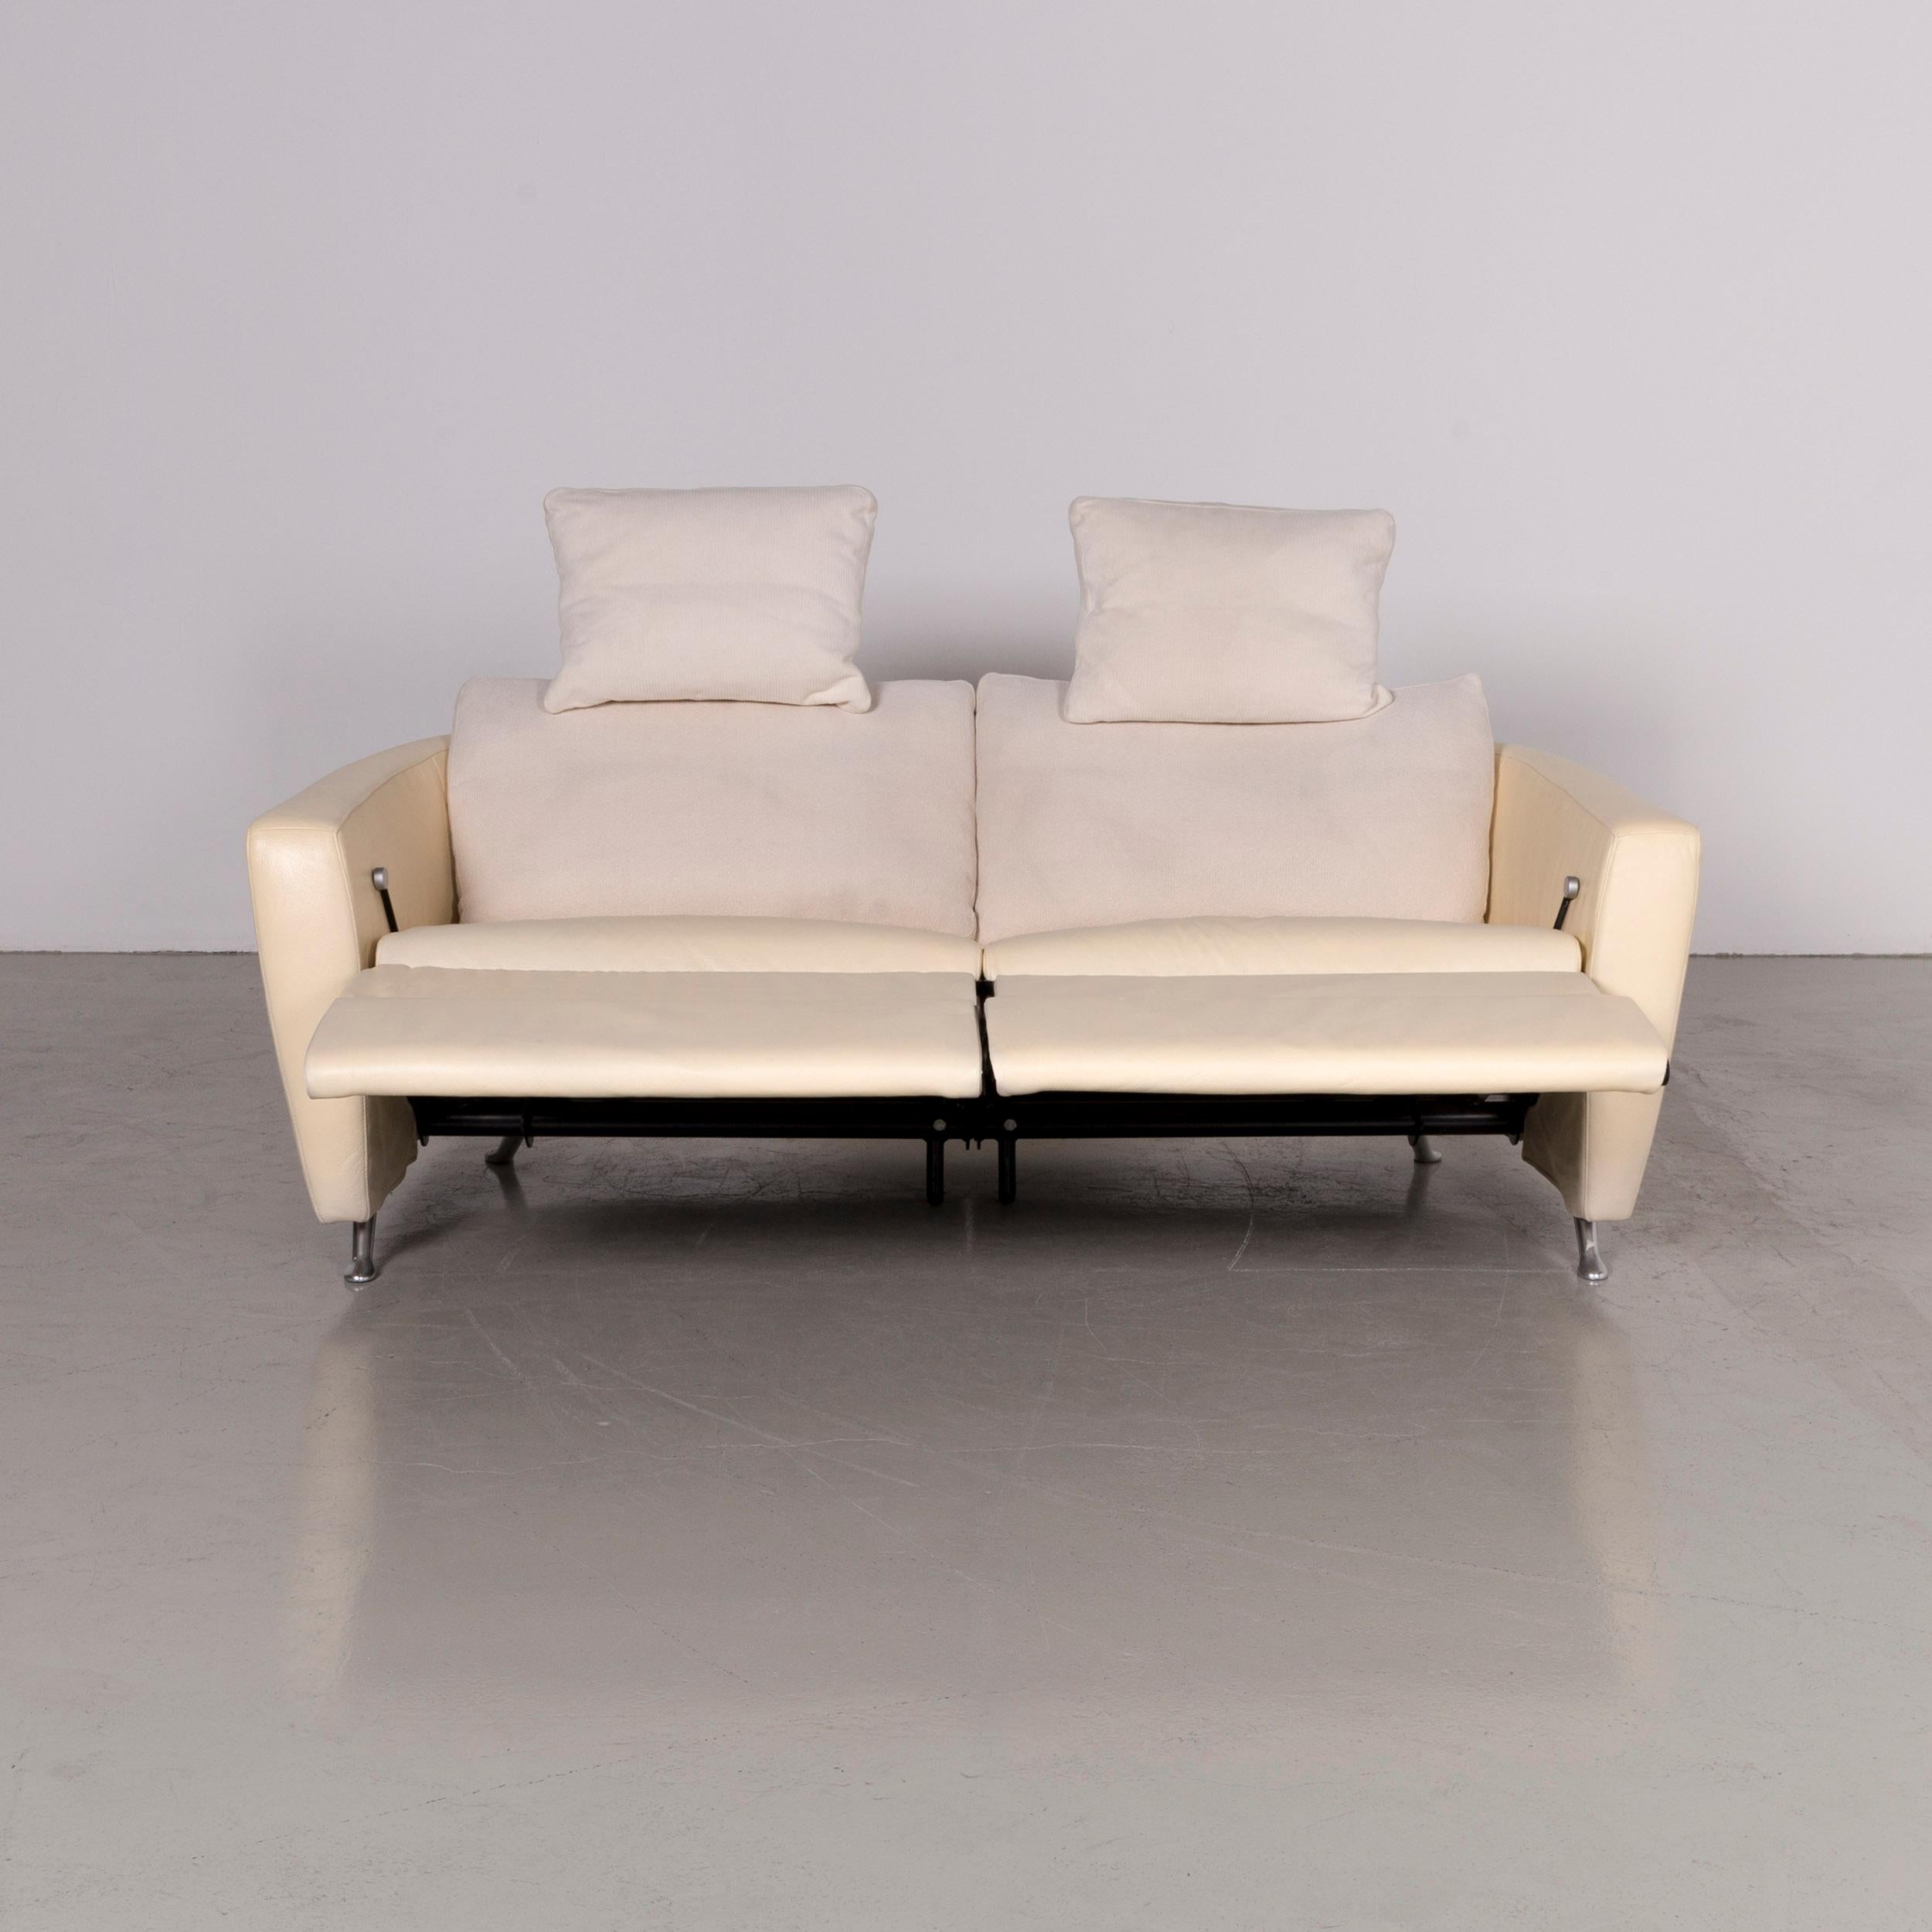 German FSM Sesam Leather Sofa Off-White Two-Seat Function For Sale